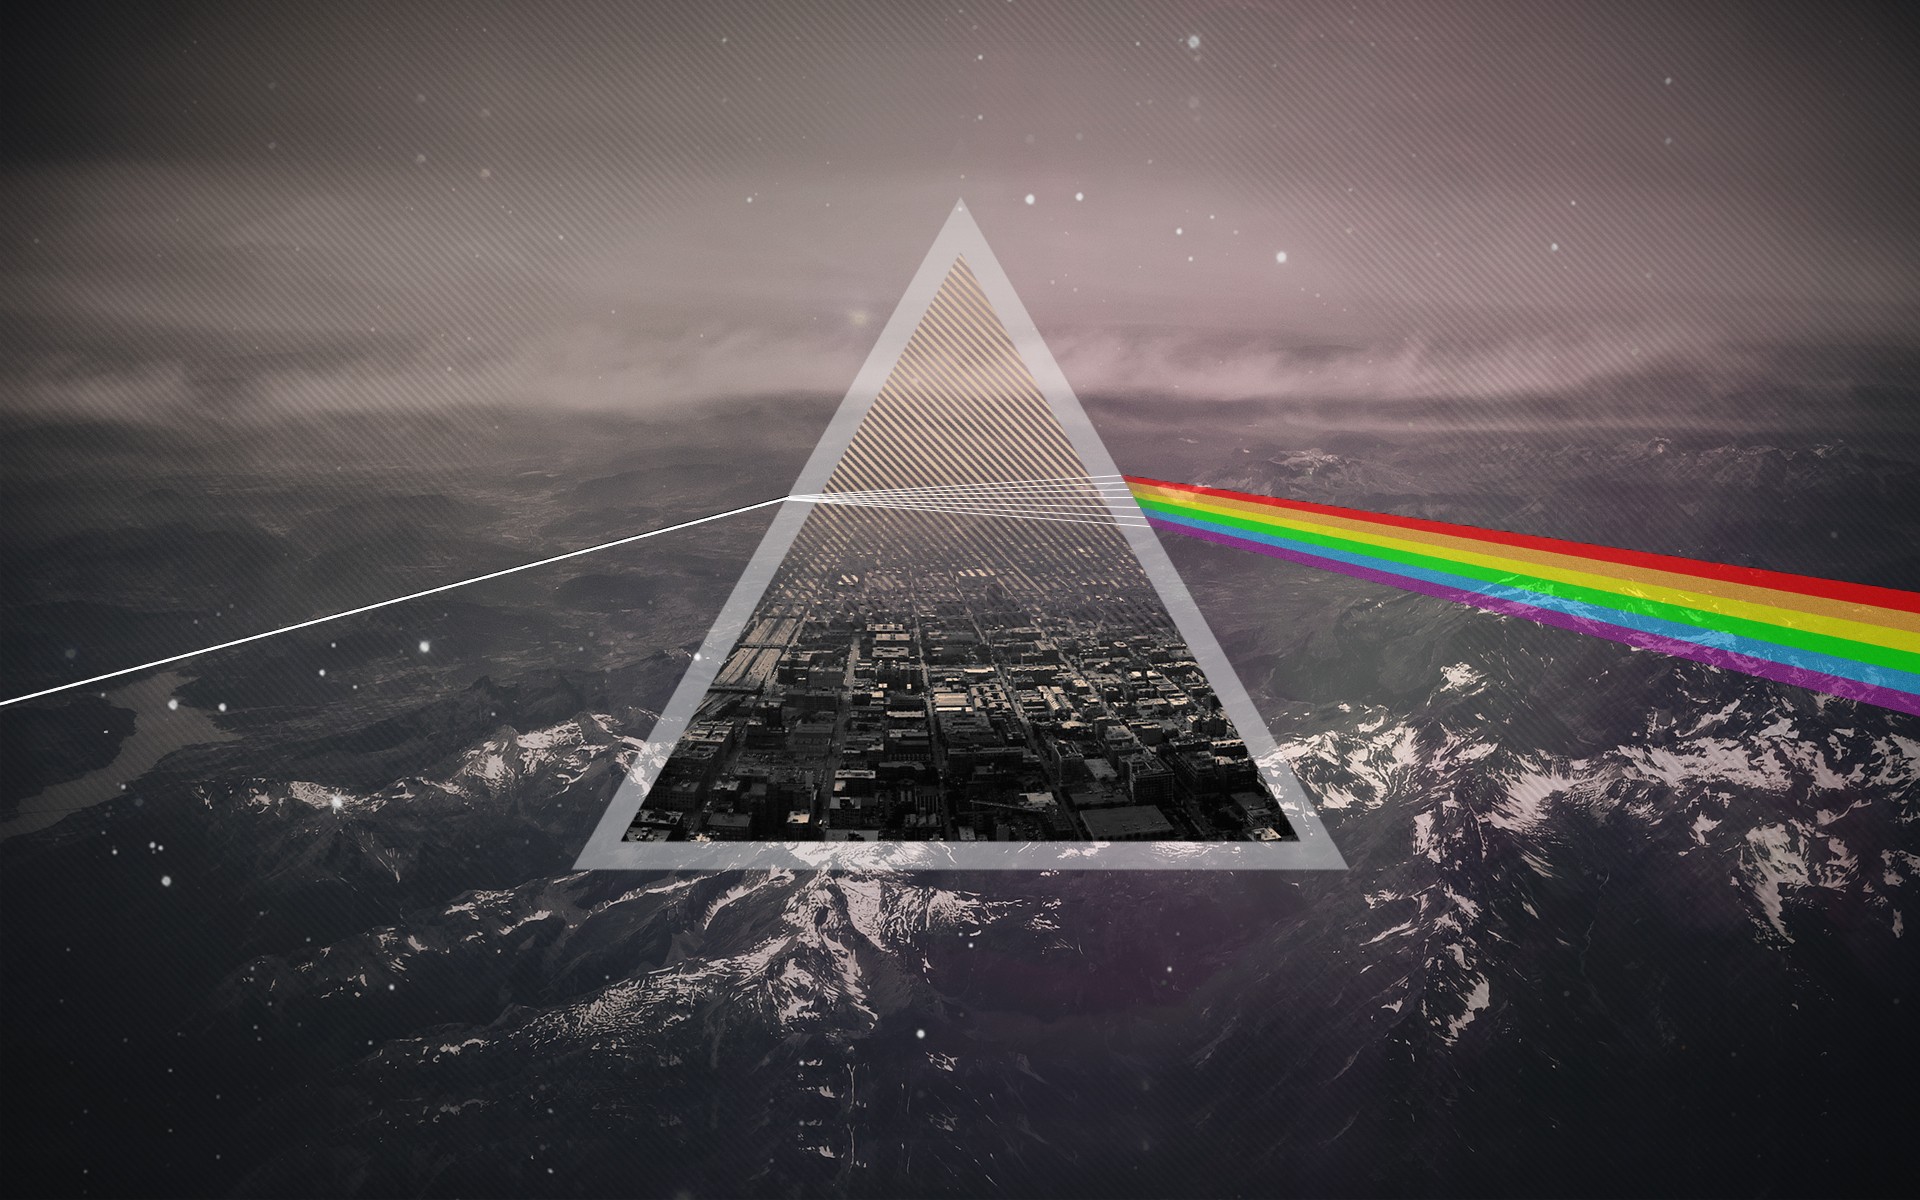 General 1920x1200 Pink Floyd The Dark Side of the Moon triangle mountains picture-in-picture music landscape